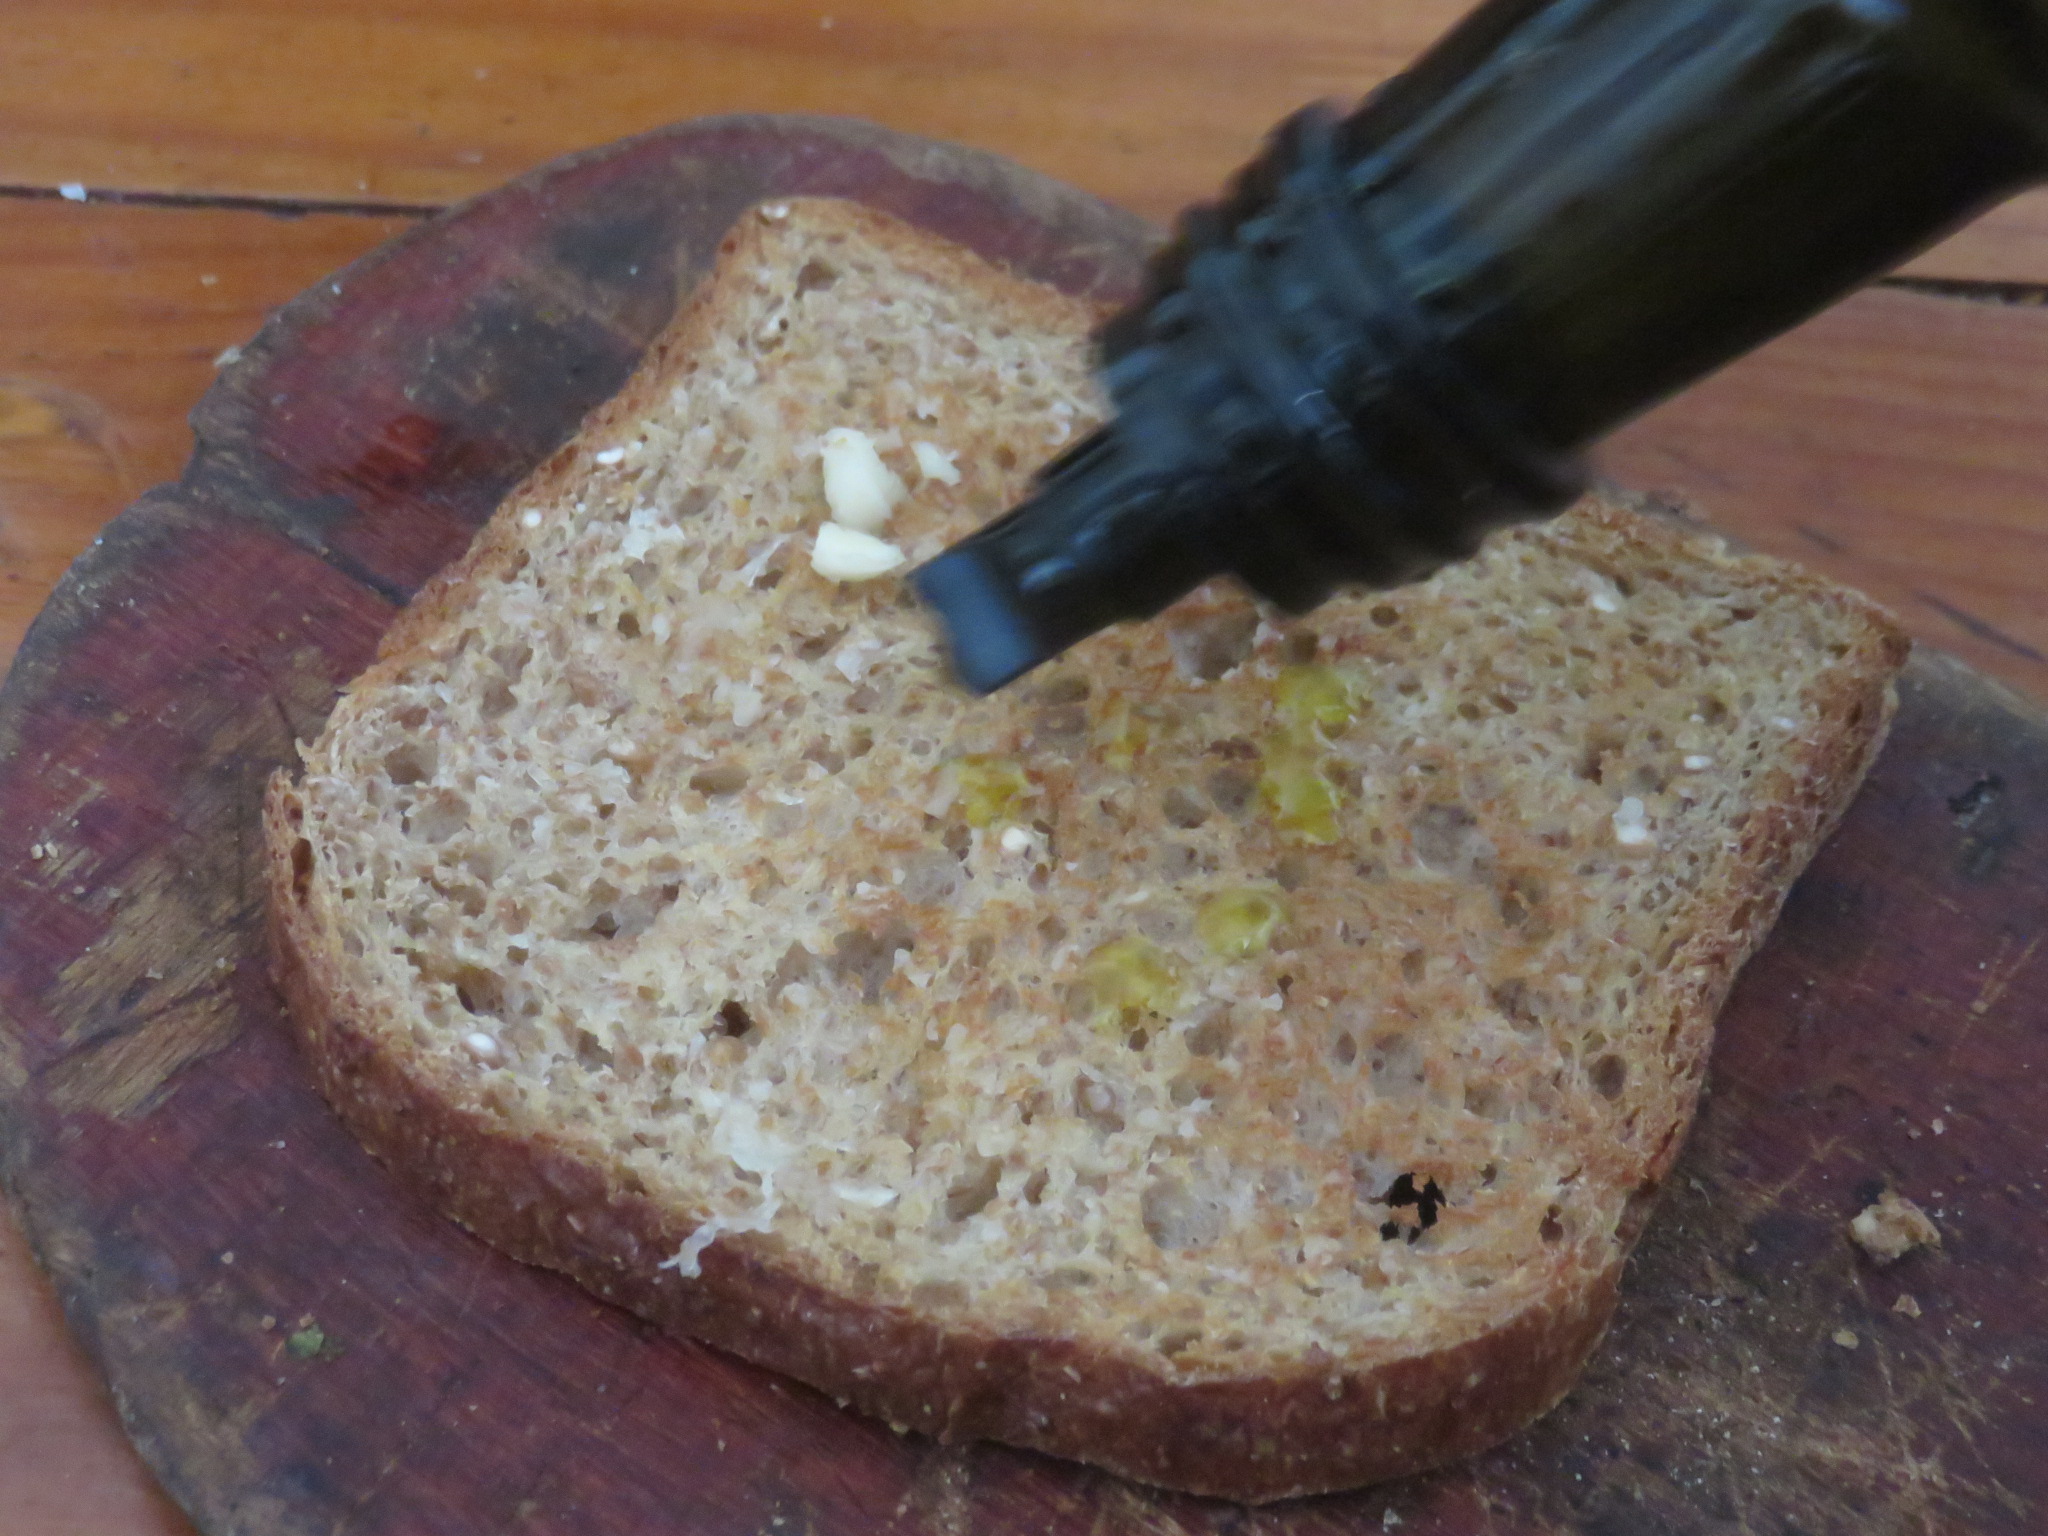 for controlling bad cholesterol, consume some olive oil, drizzle it on the toast